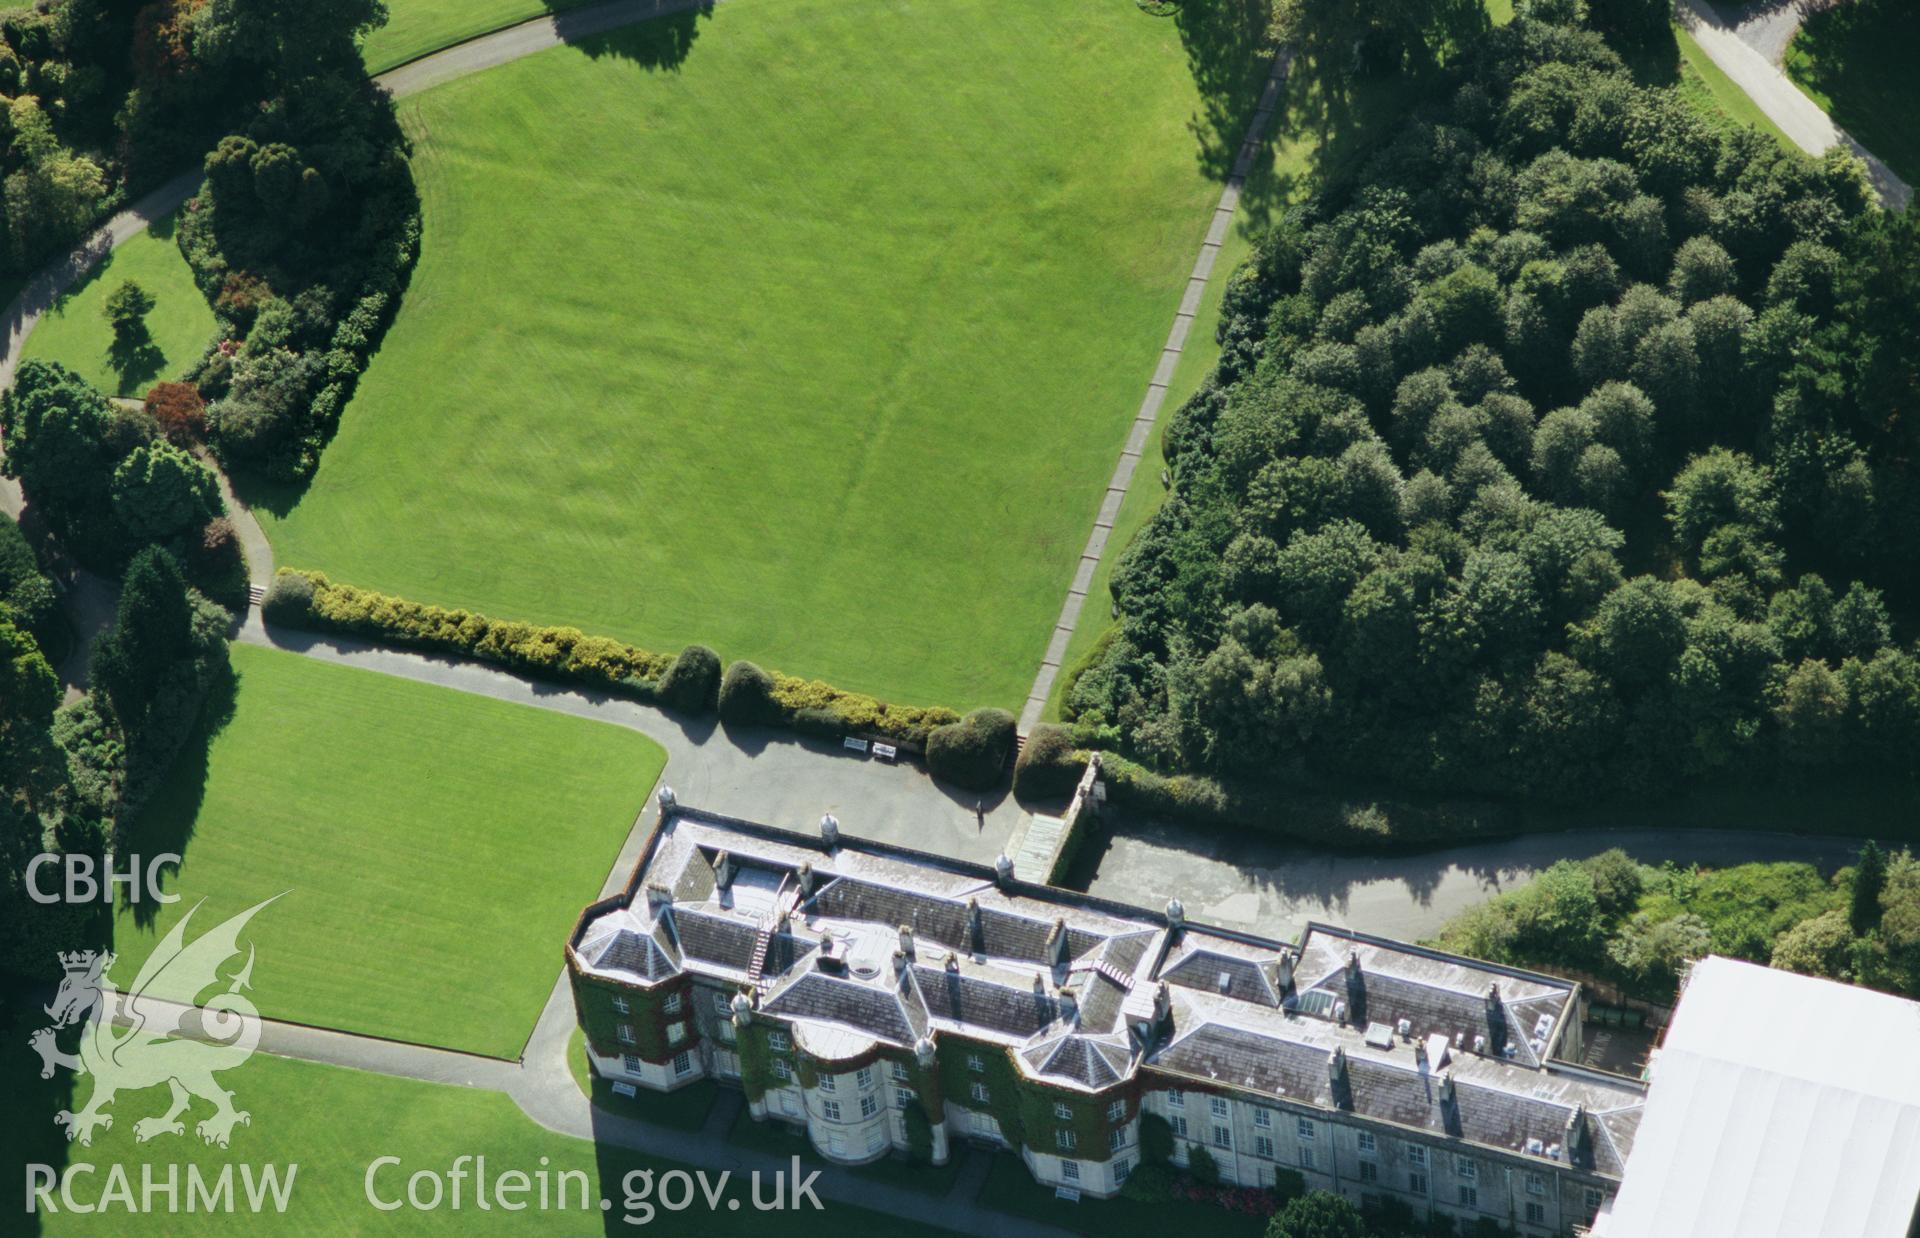 Slide of RCAHMW colour oblique aerial photograph of Plas Newydd, taken by Toby Driver, 2004.